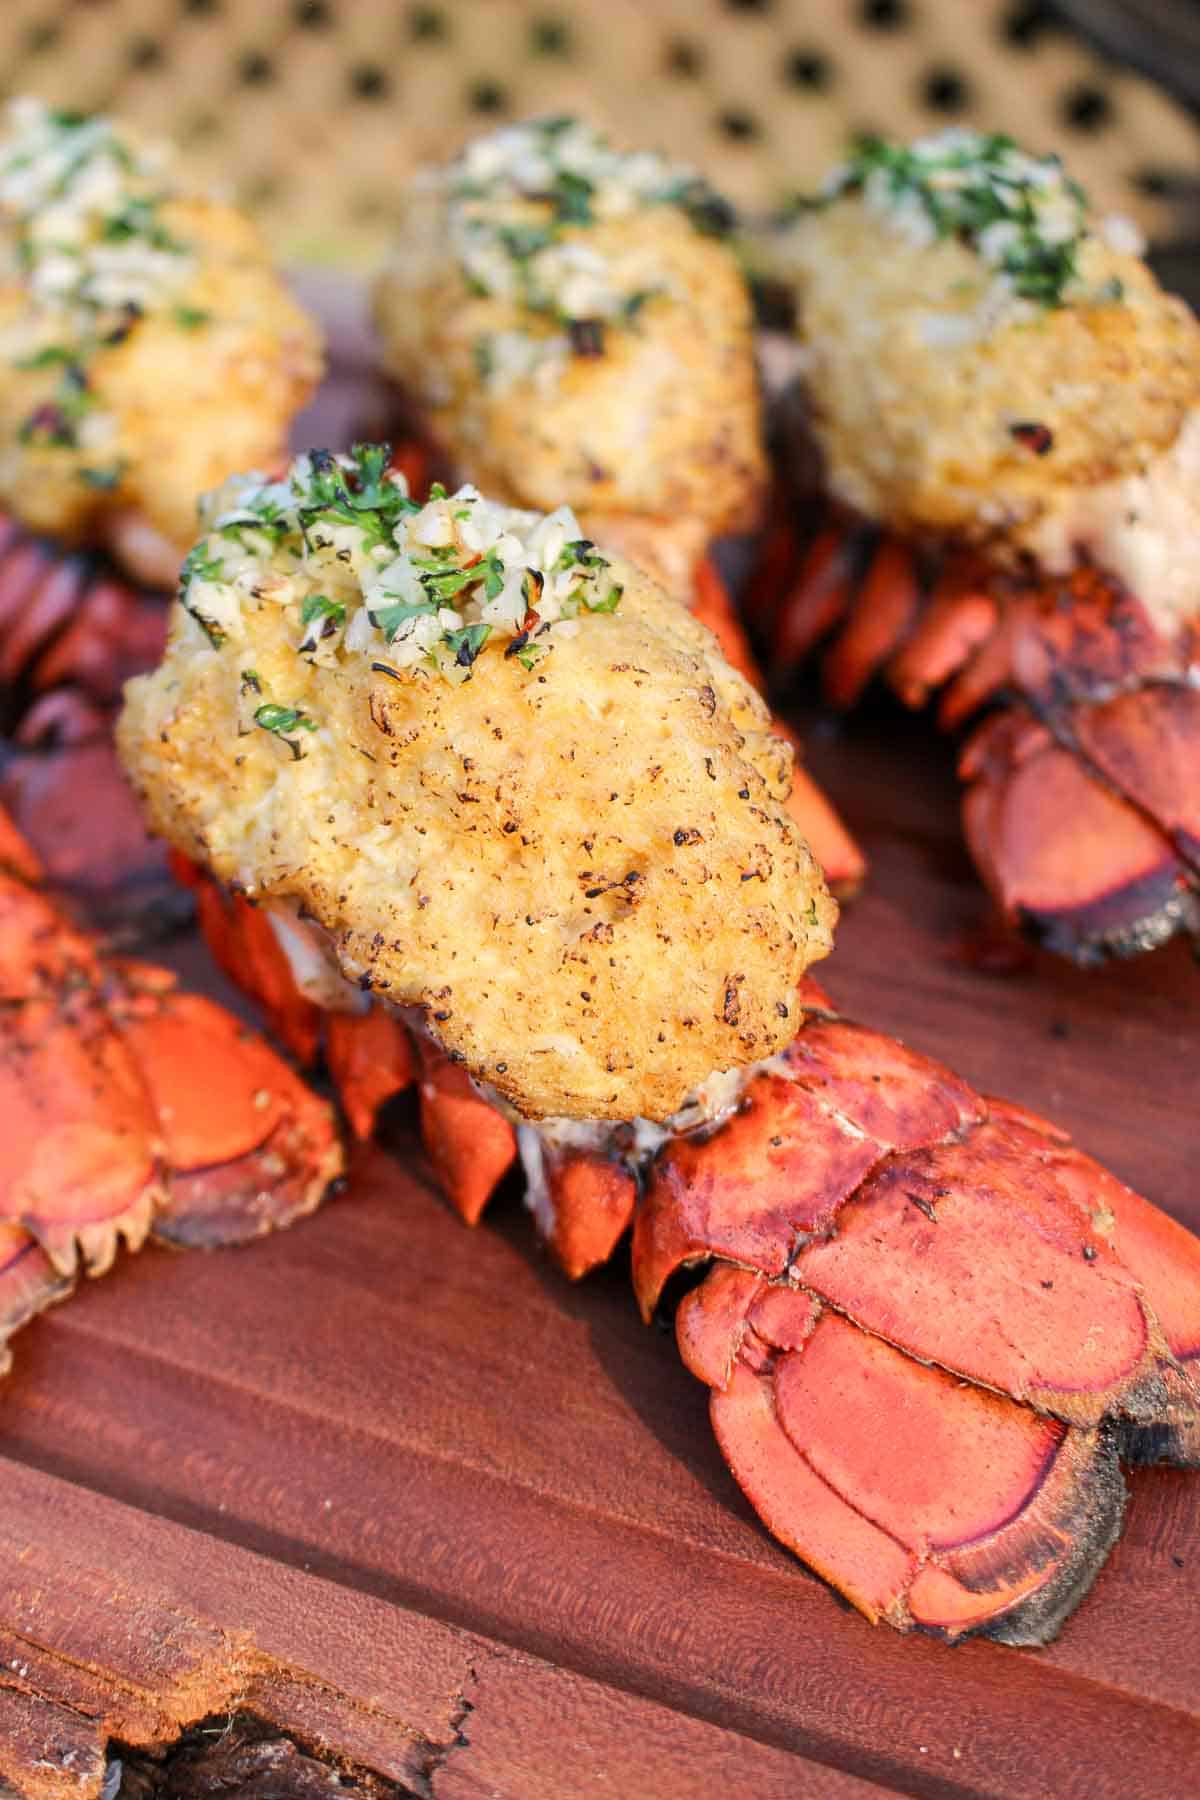 A close up shot of a finished stuffed lobster tail.